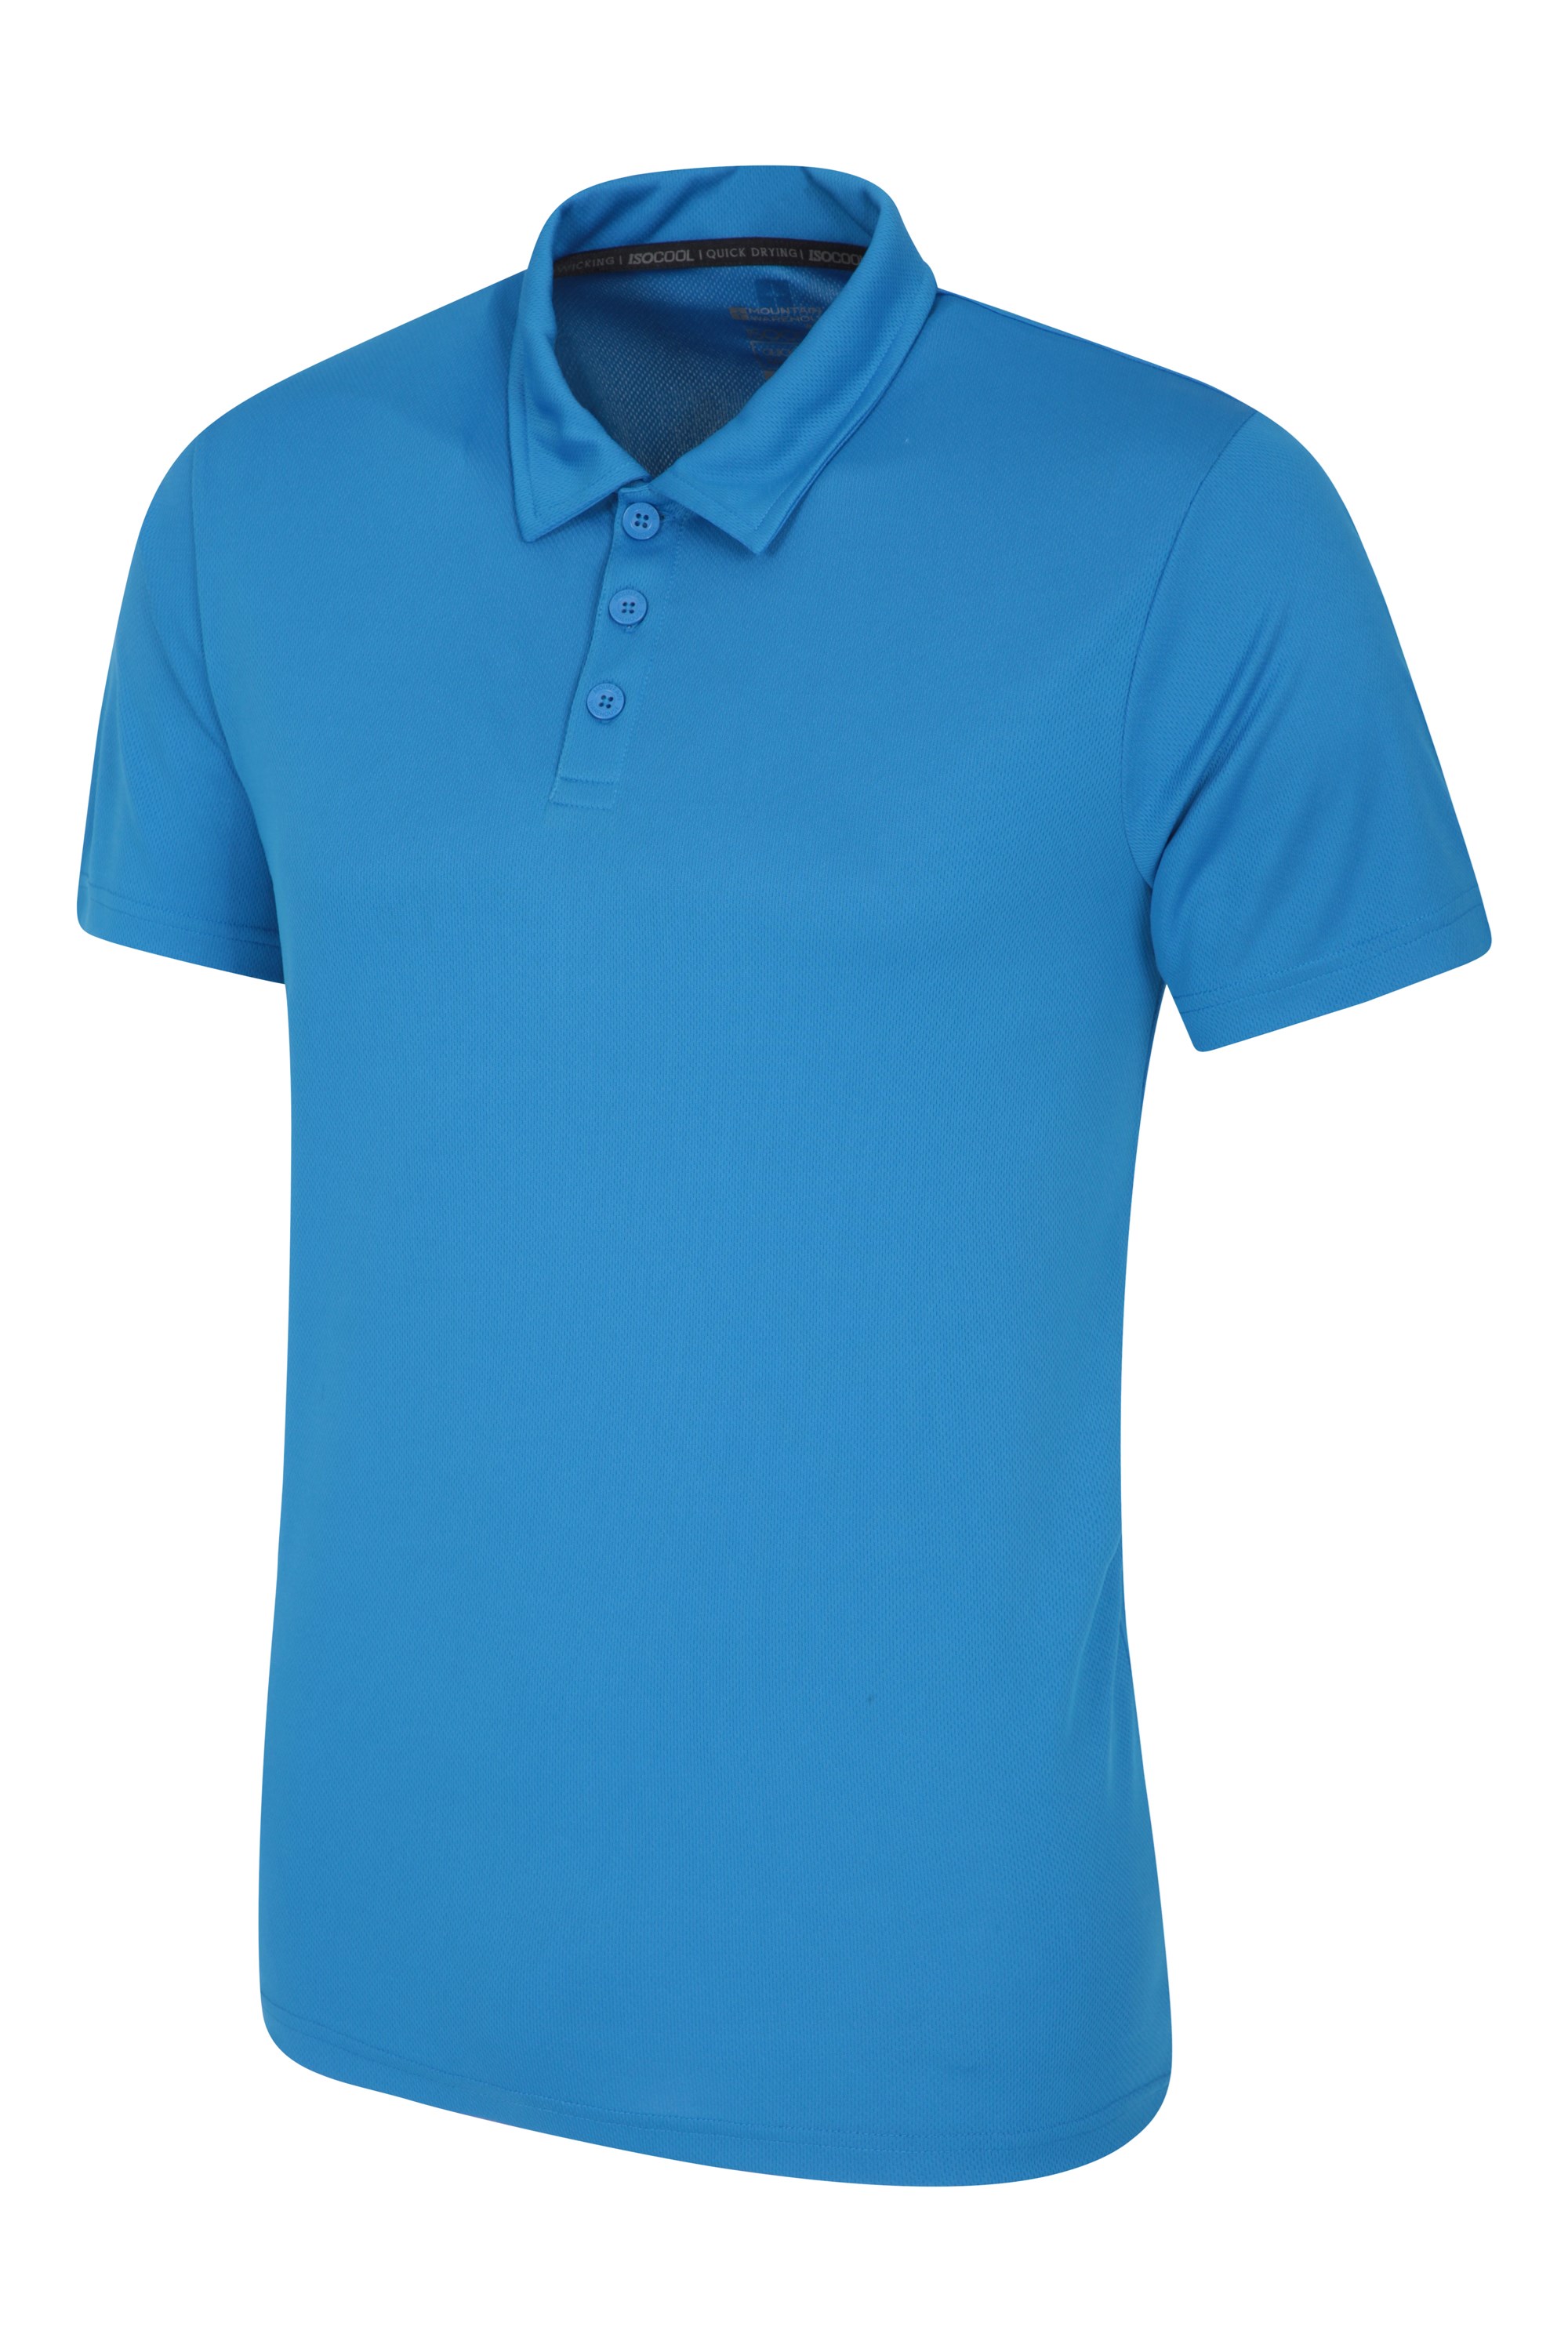 Highly Breathable Tee Wicking Top with Classic Polo Design Quick Dry Summer T-Shirt Mountain Warehouse Deuce IsoCool Men’s Polo for Winter Travelling 